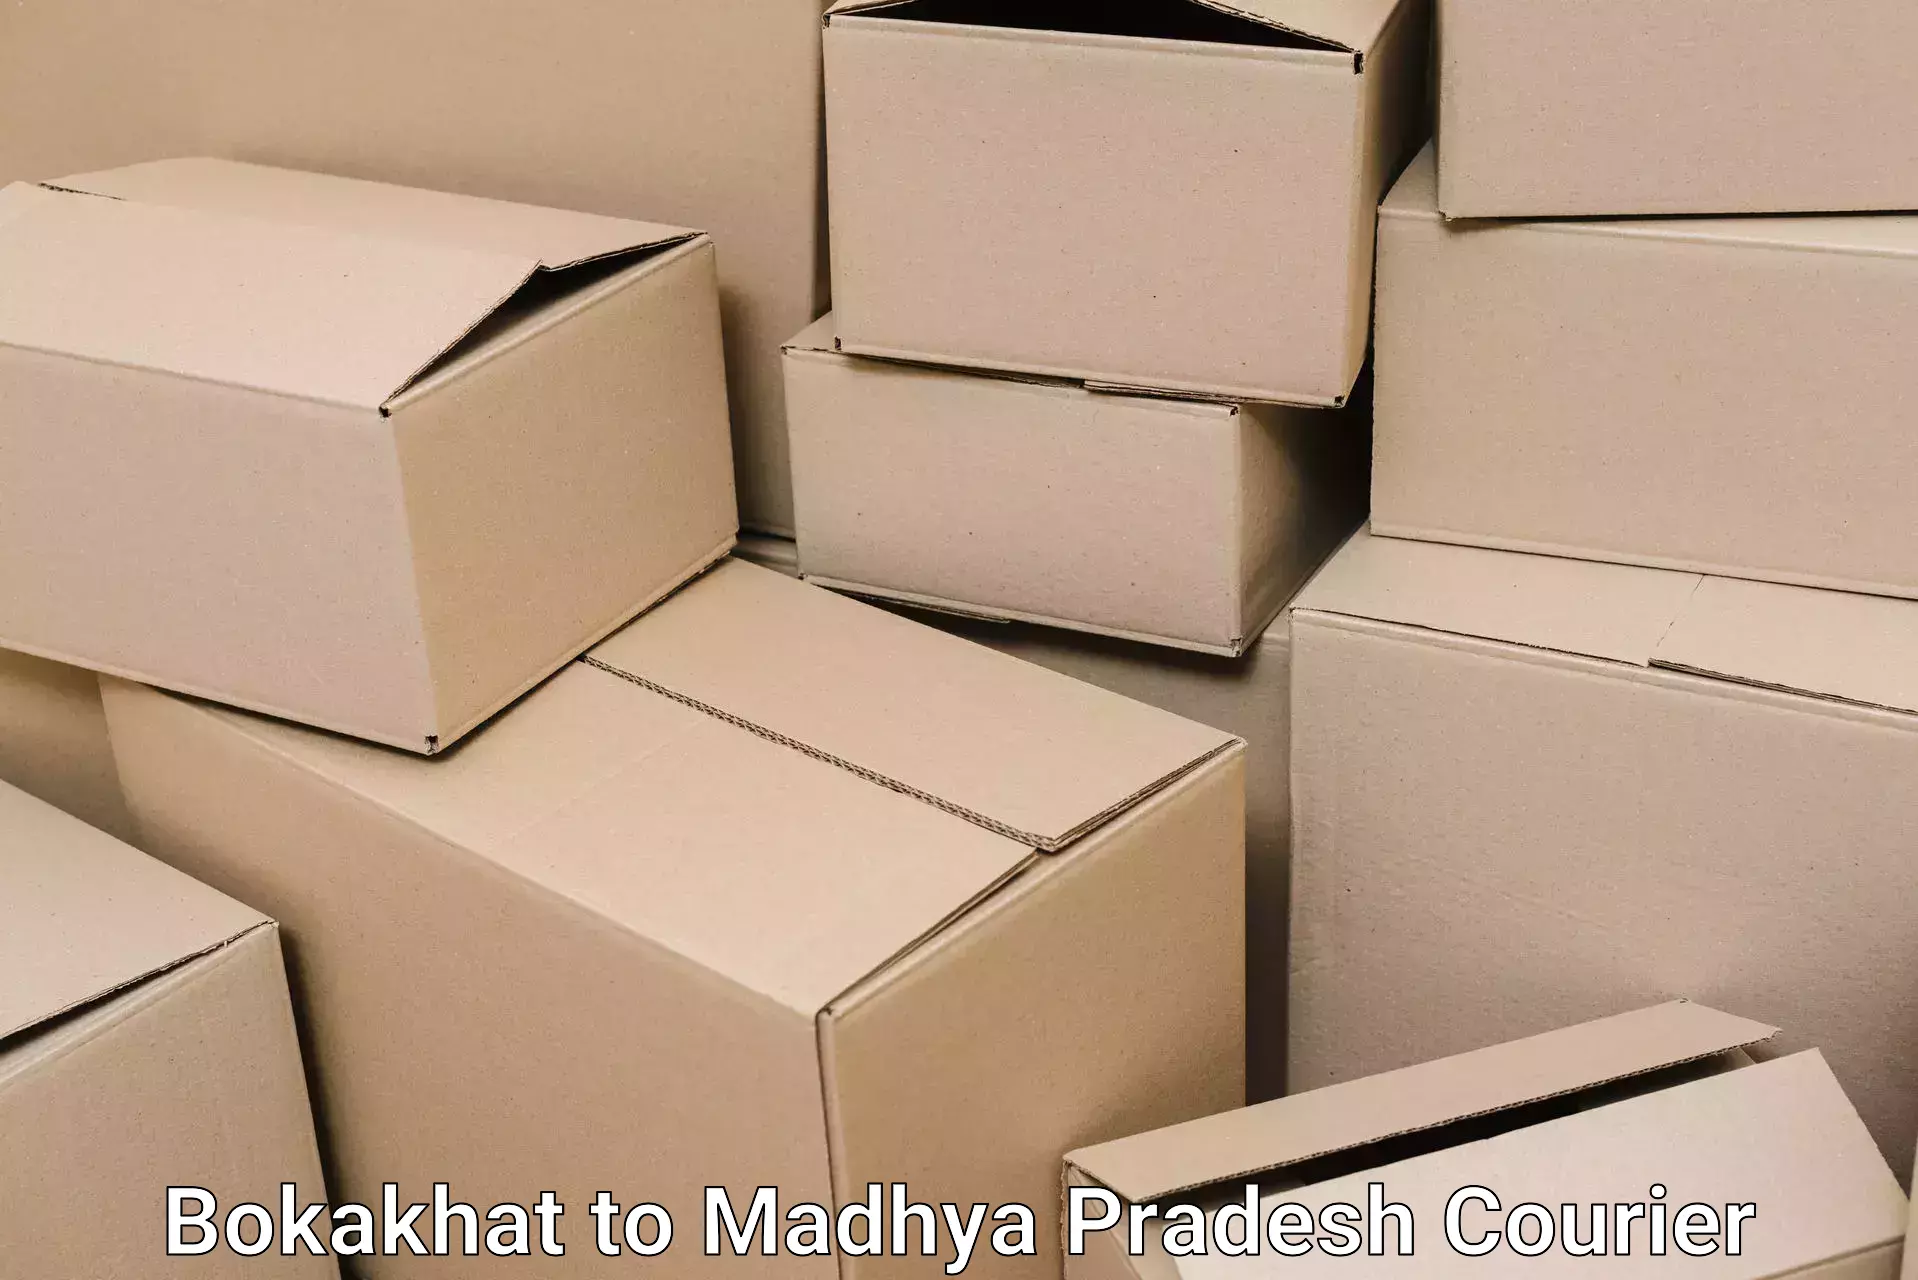 Trusted moving company Bokakhat to Madwas